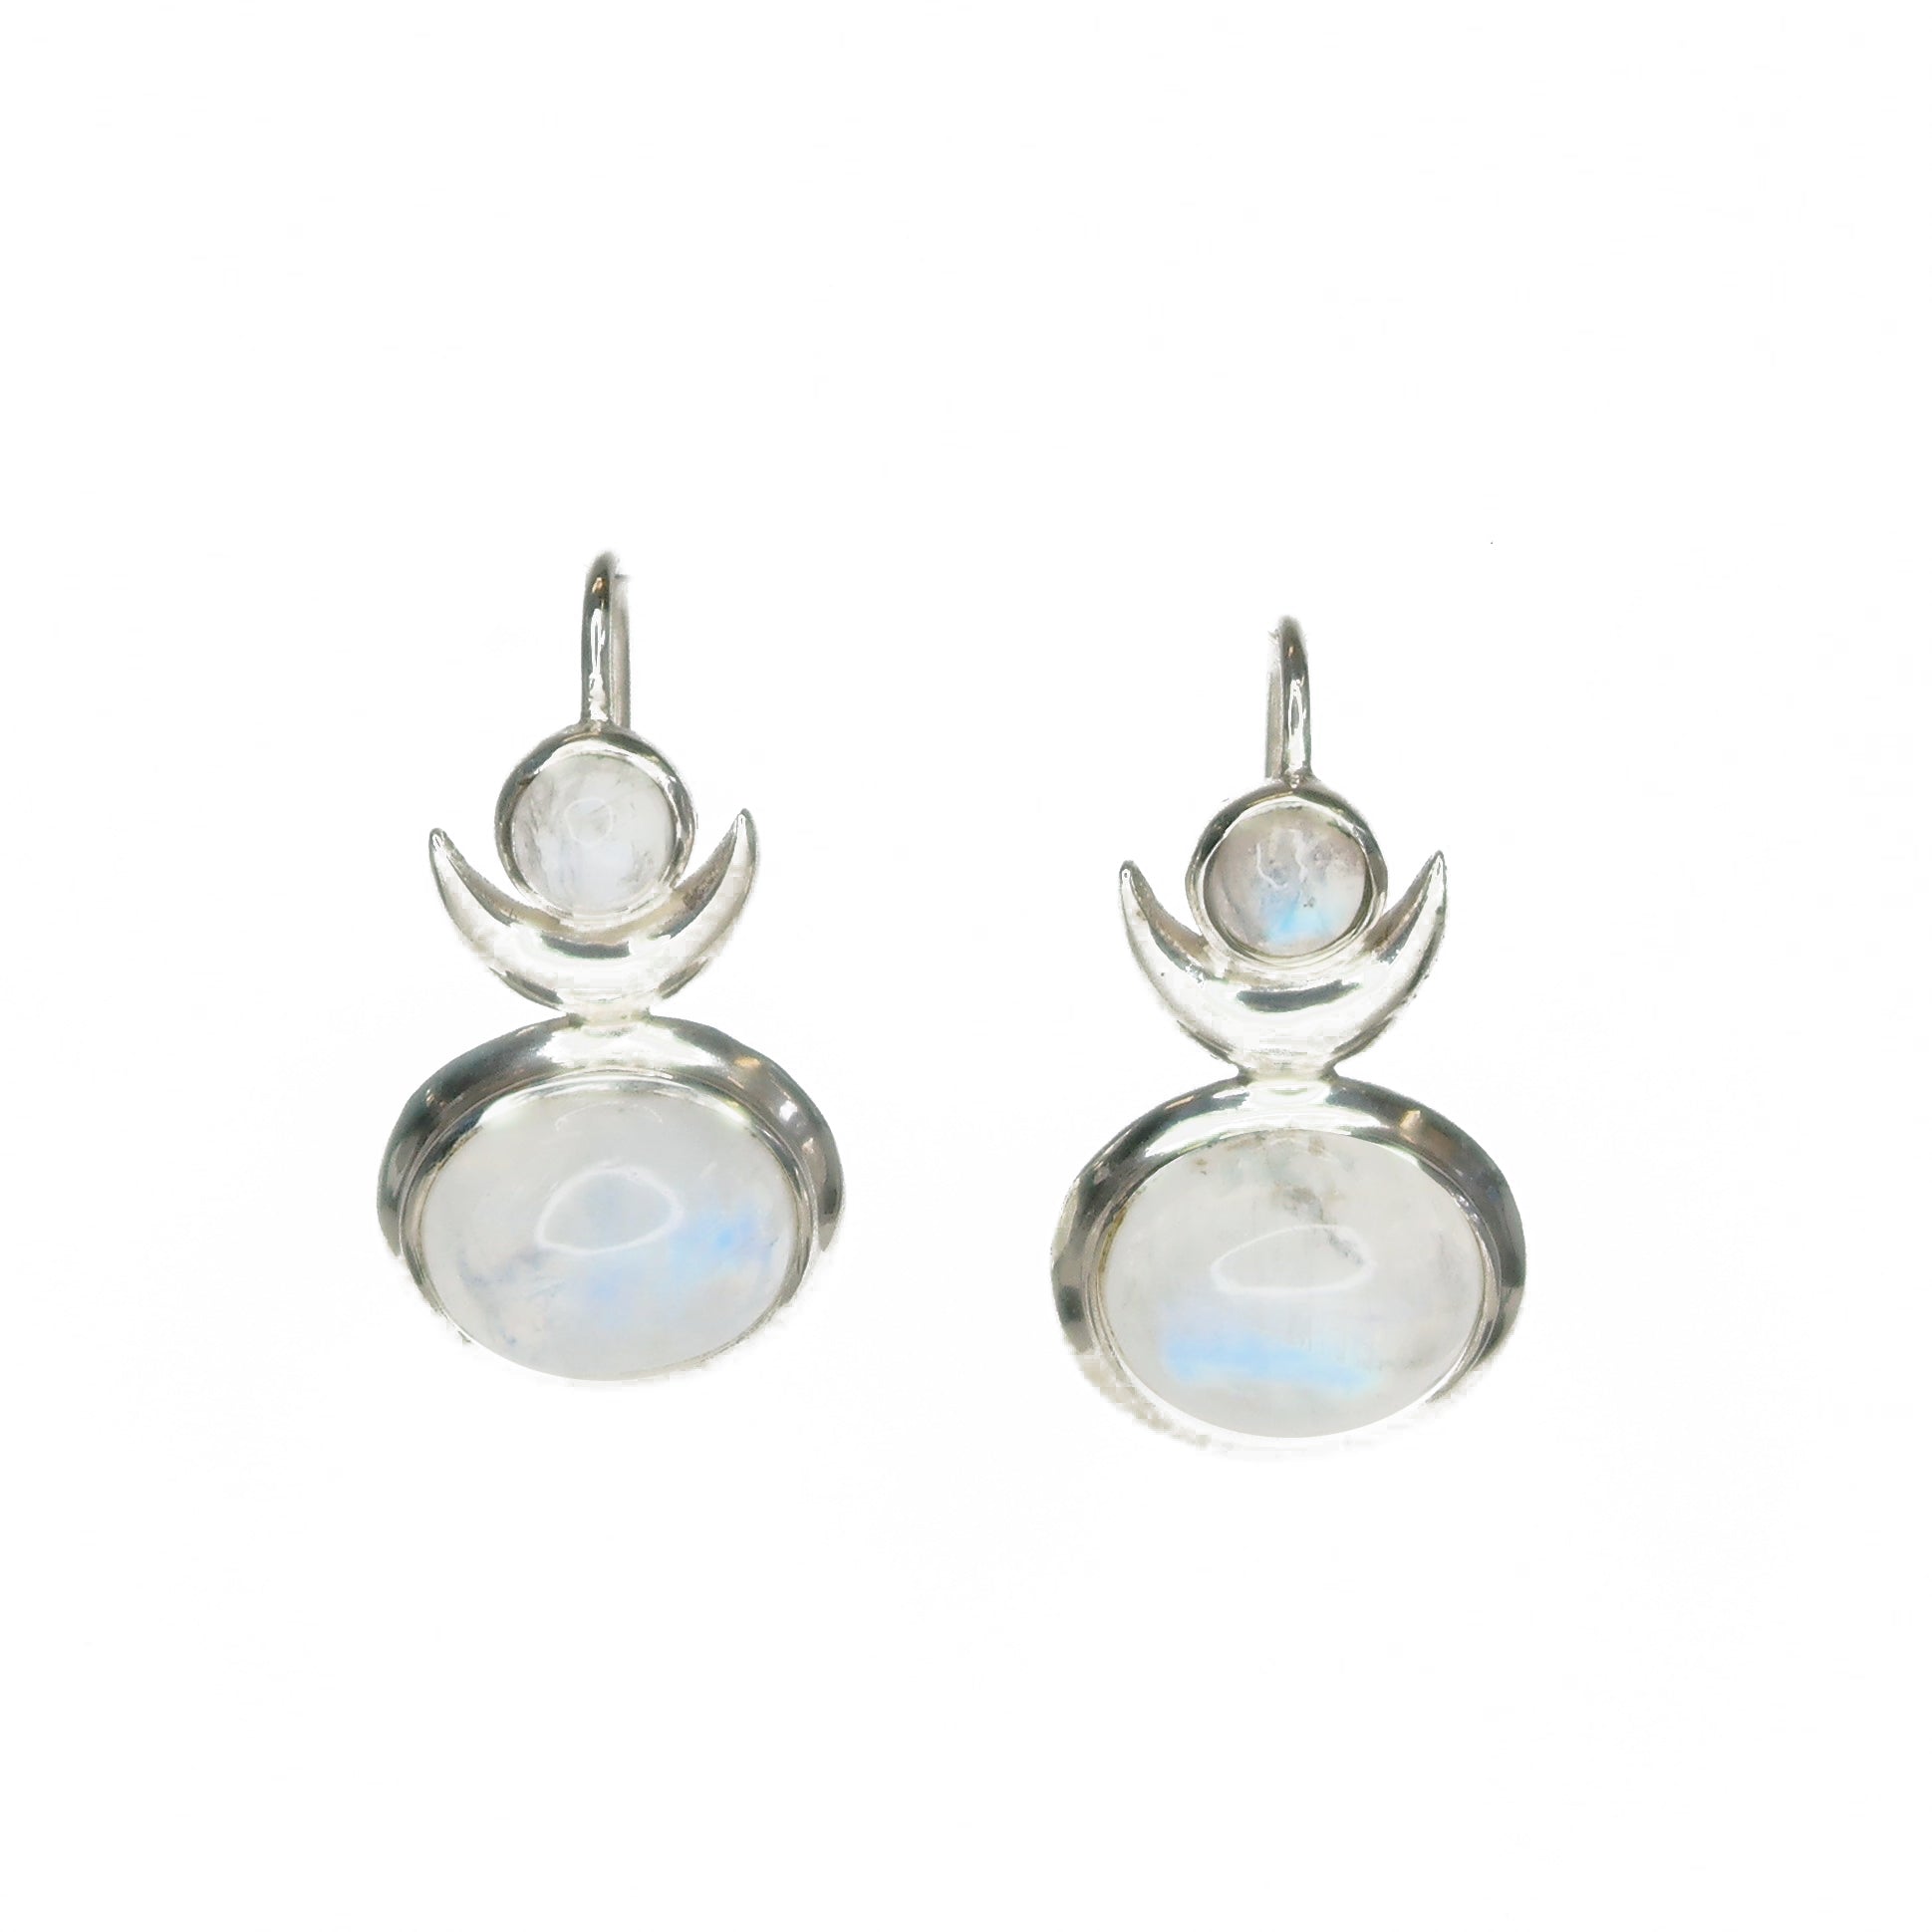 Double Drops of Moonstone